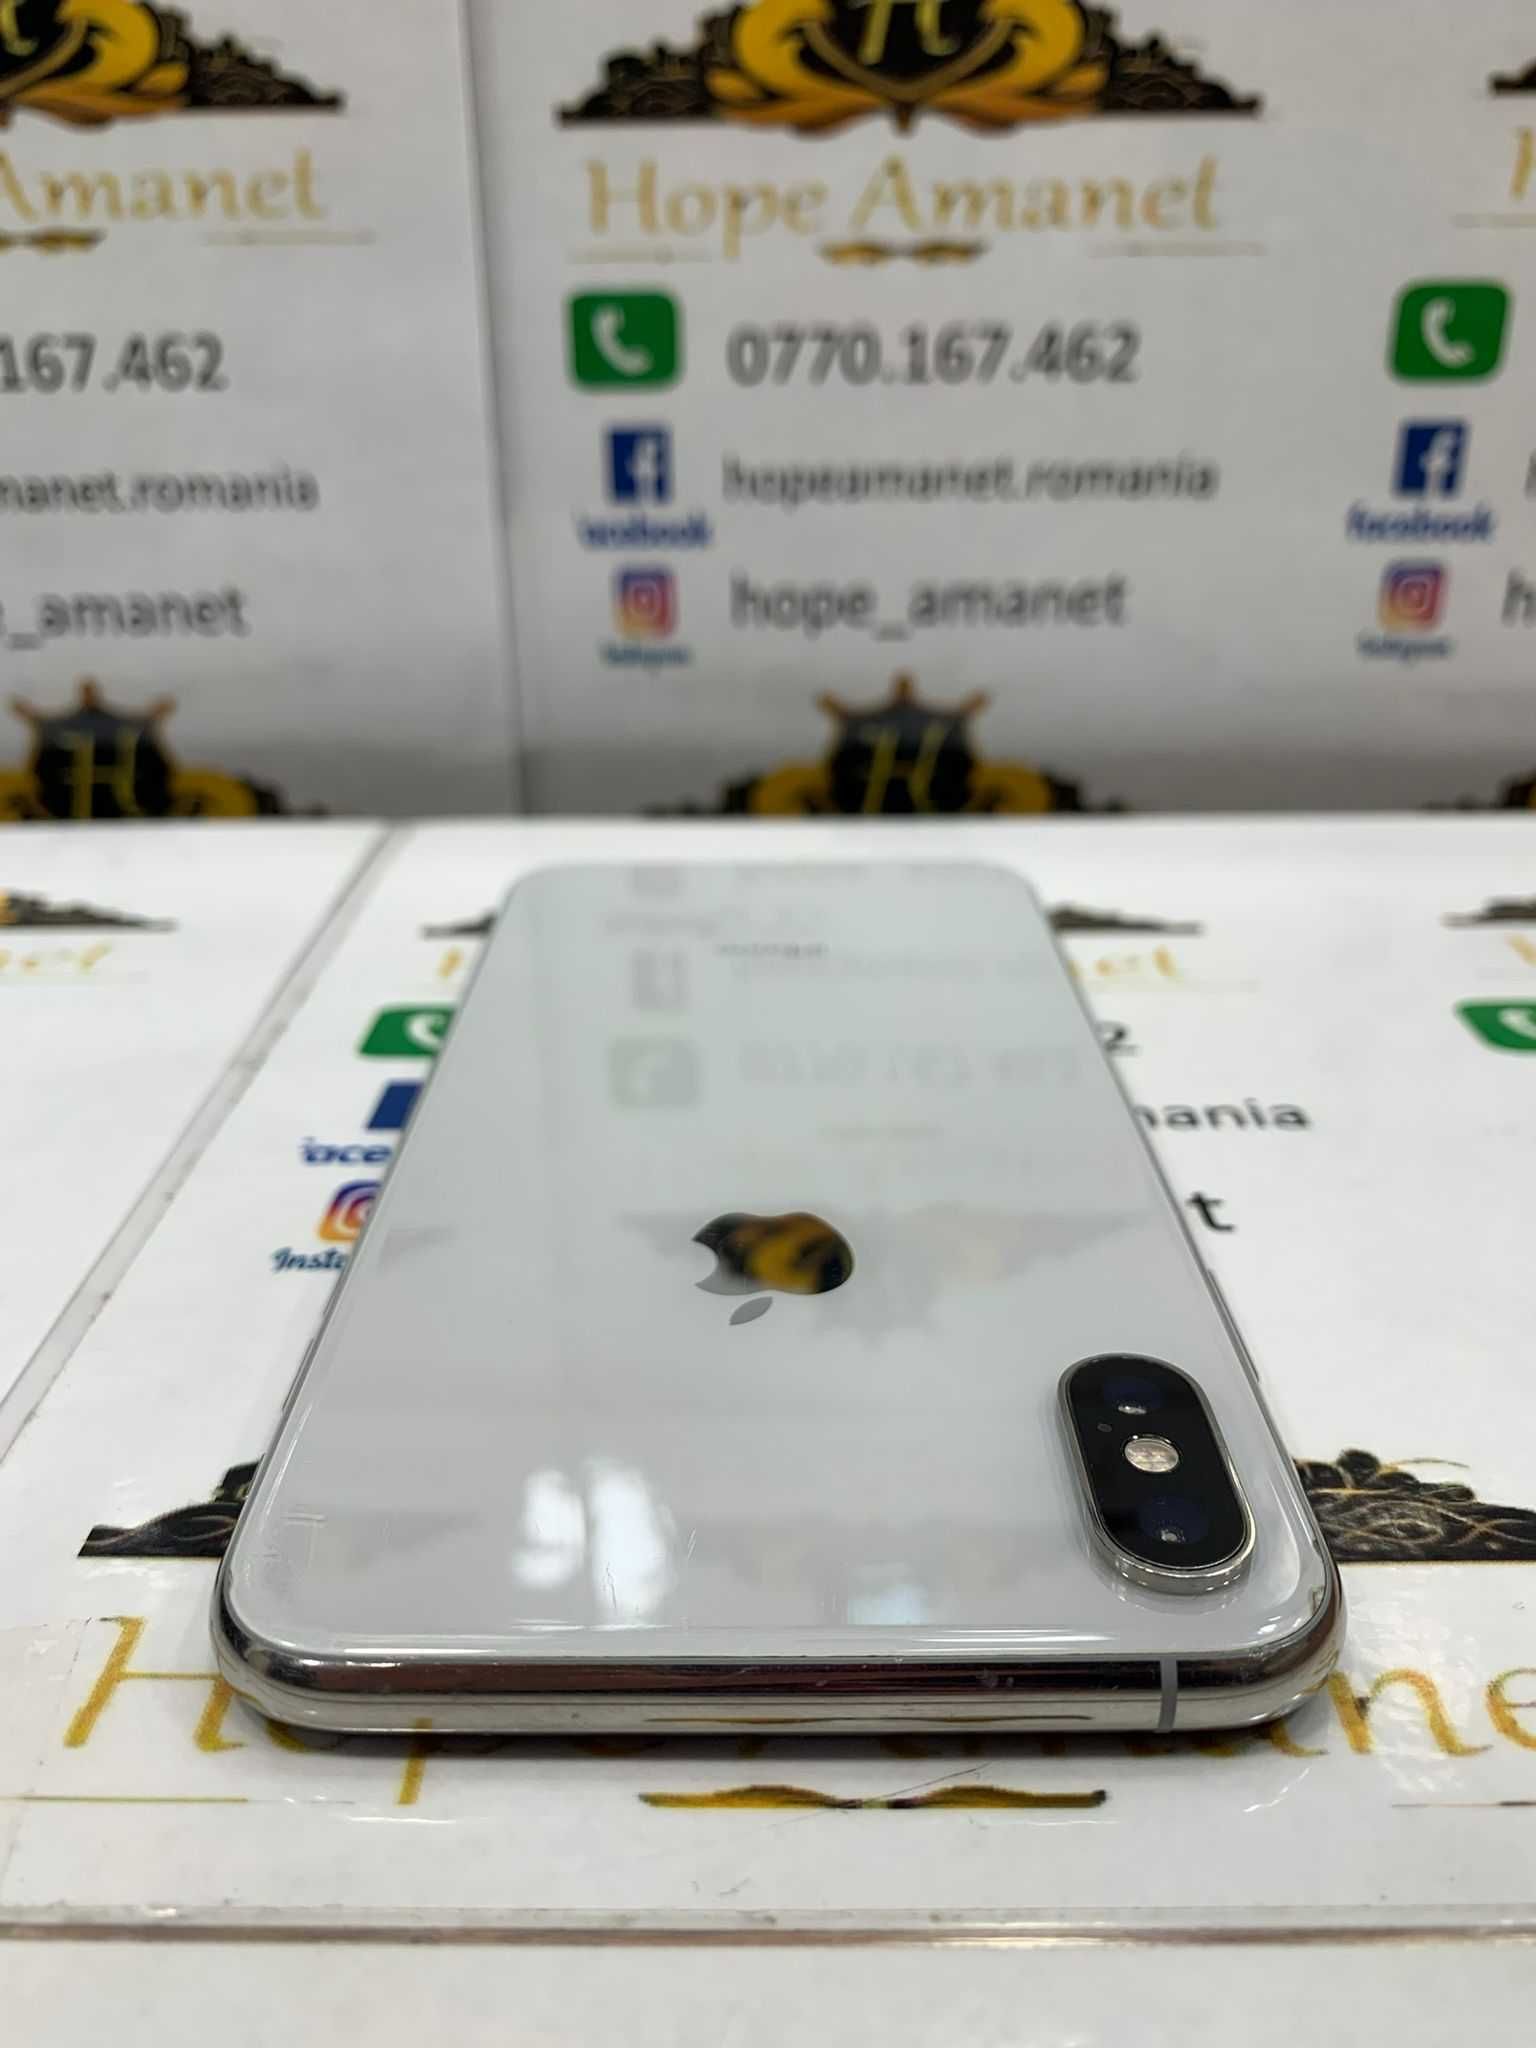 Hope Amanet P12 - Iphone XS Max / 256 Gb / Baterie 78% / Silver